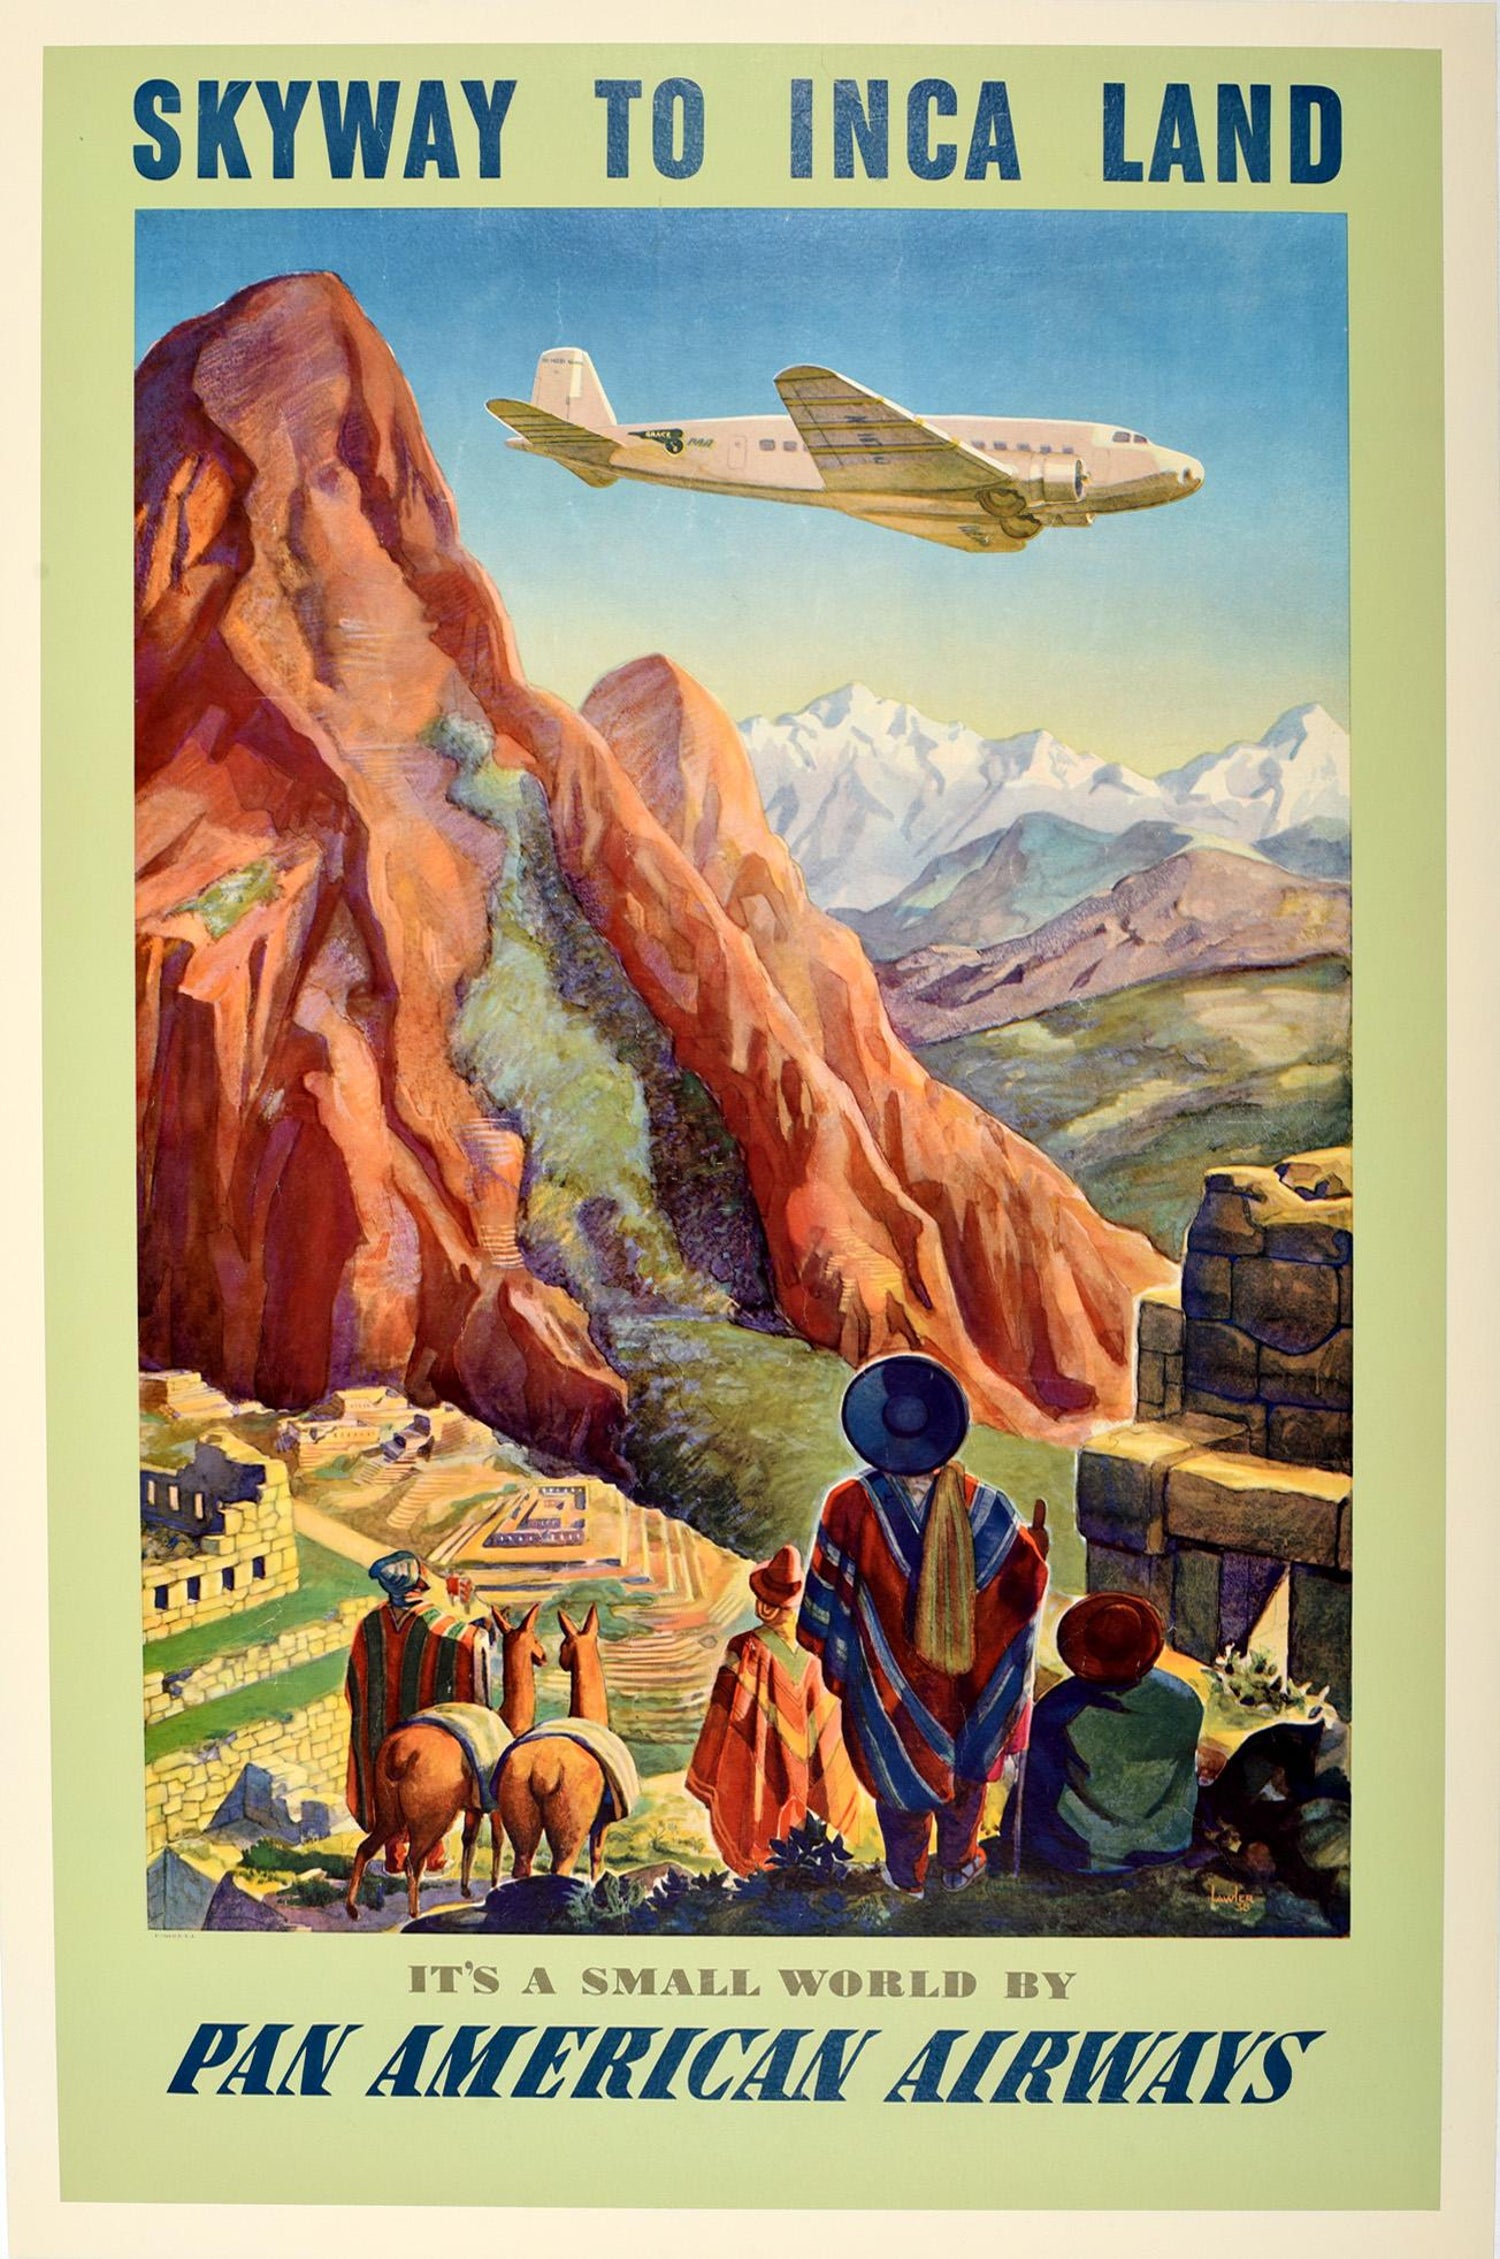 Hawaiian Master Art Print 9in x 12in PAA Fly to South Seas Isles via Pan American - Vintage World Travel Poster by Paul George Lawler c.1940s Pan American Airlines 